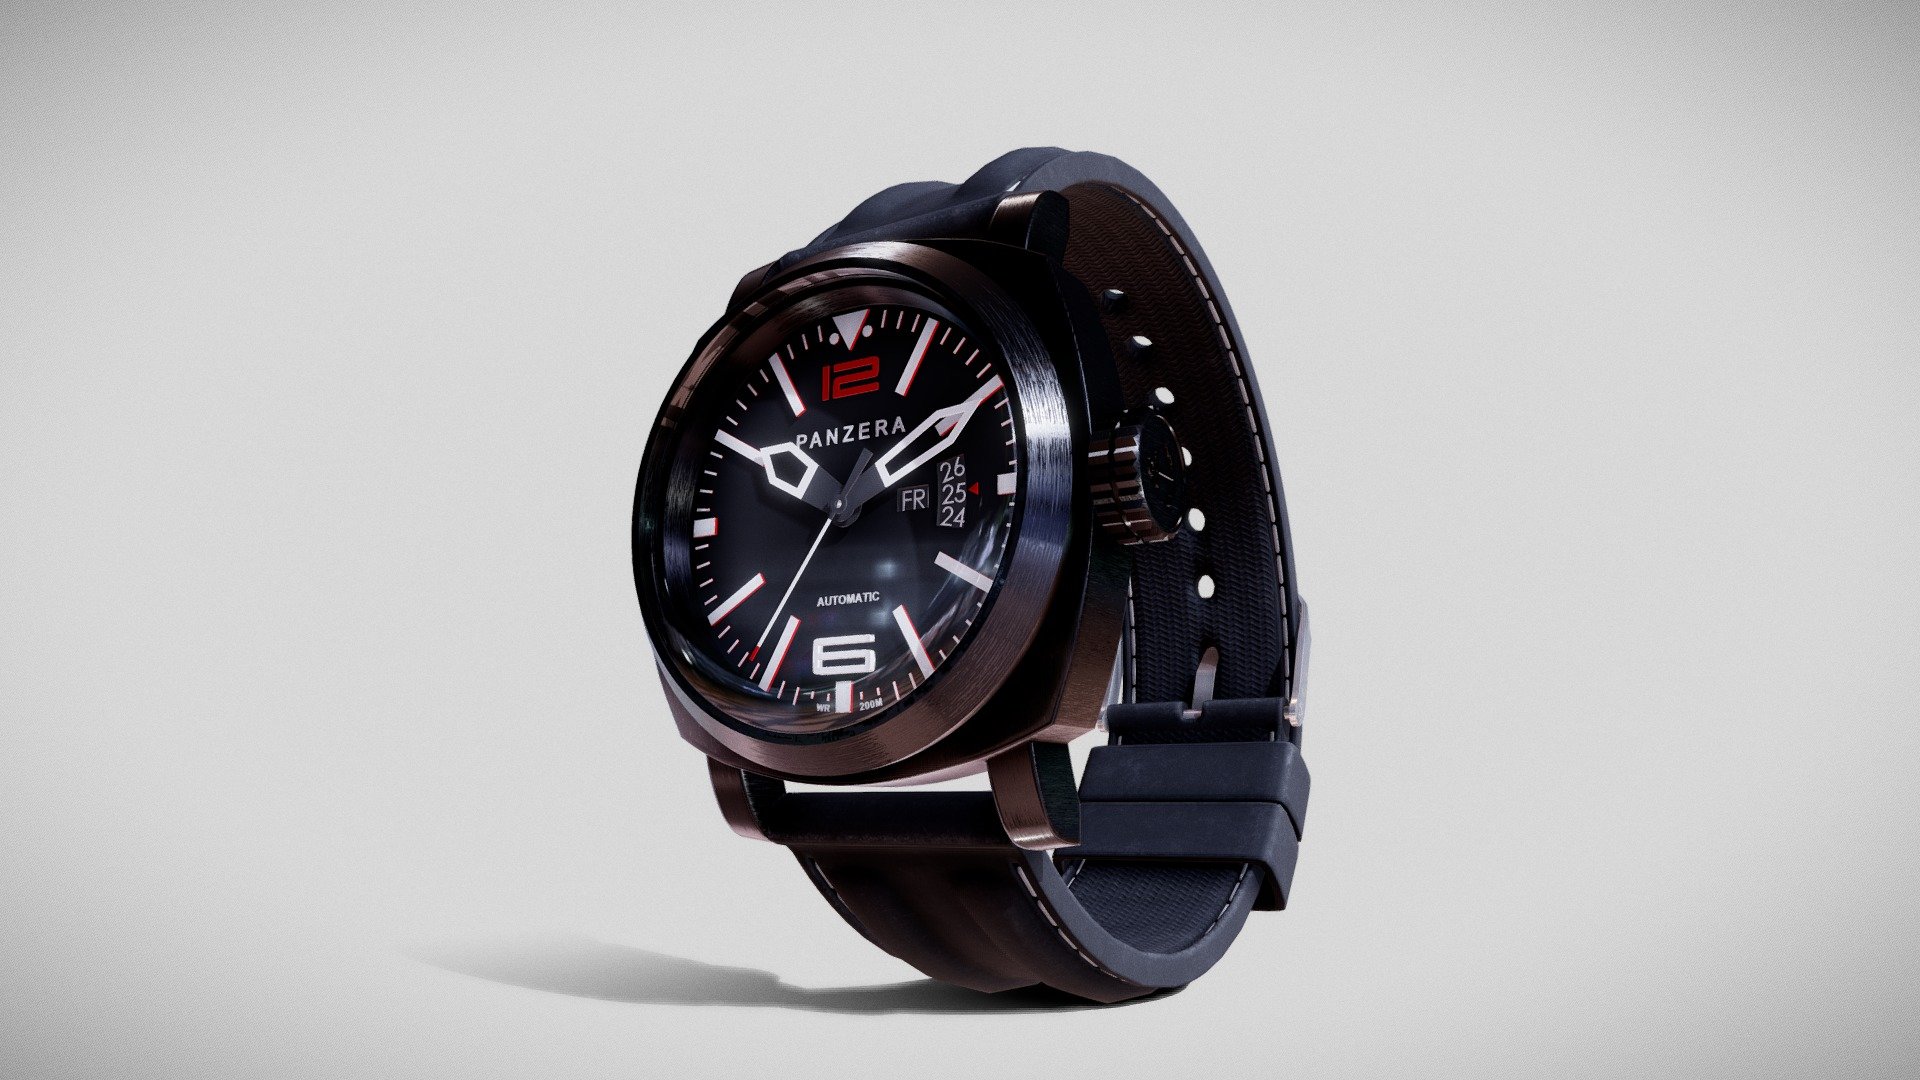 The model of the PANZERA watch I have recently modeled and textured

See more of our work on: https://www.behance.net/marcinlubecki

If you need personalized 3d models or got any questions to us or just need to talk, feel free to contact at: marcinlubecki@gmail.com

Published by 3ds Max - Panzera Watch 2019 - Buy Royalty Free 3D model by Marcin Lubecki (@Lubus) 3d model